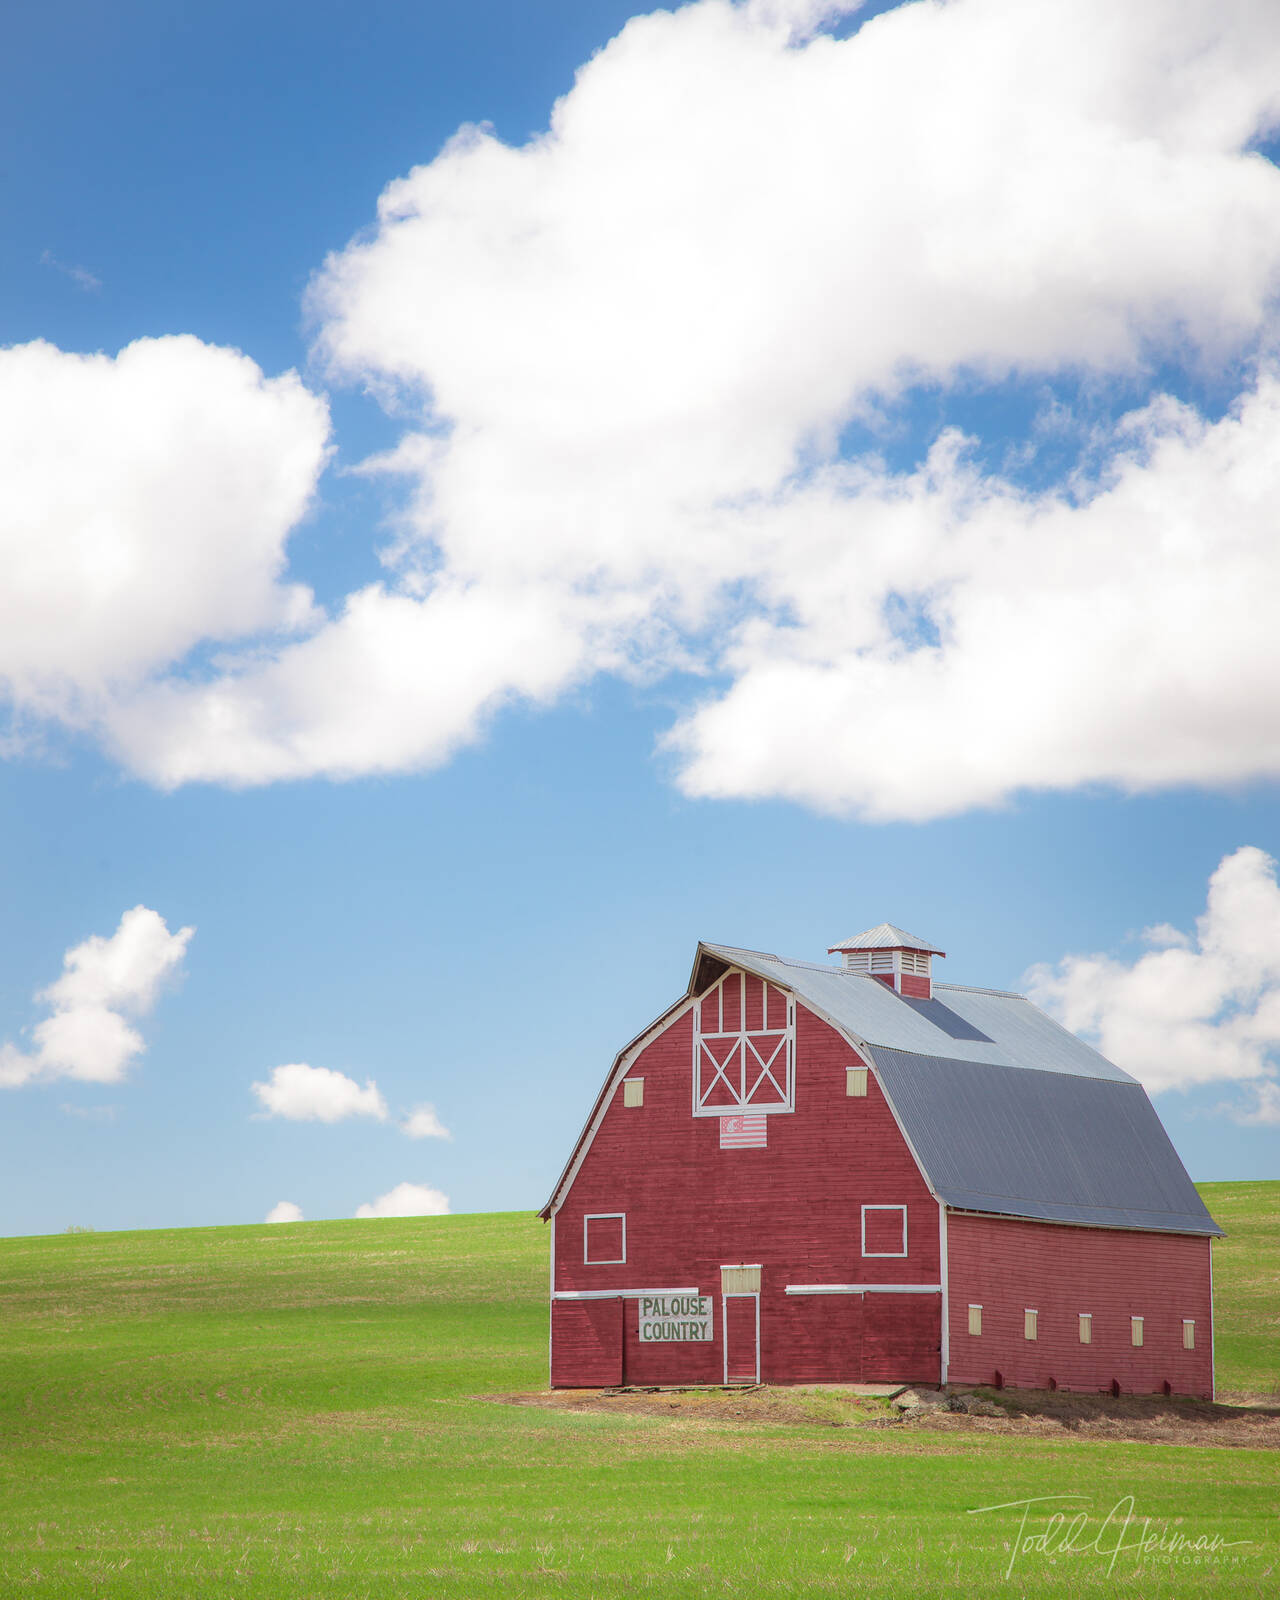 Image of Palouse Country Barn by Todd Heiman